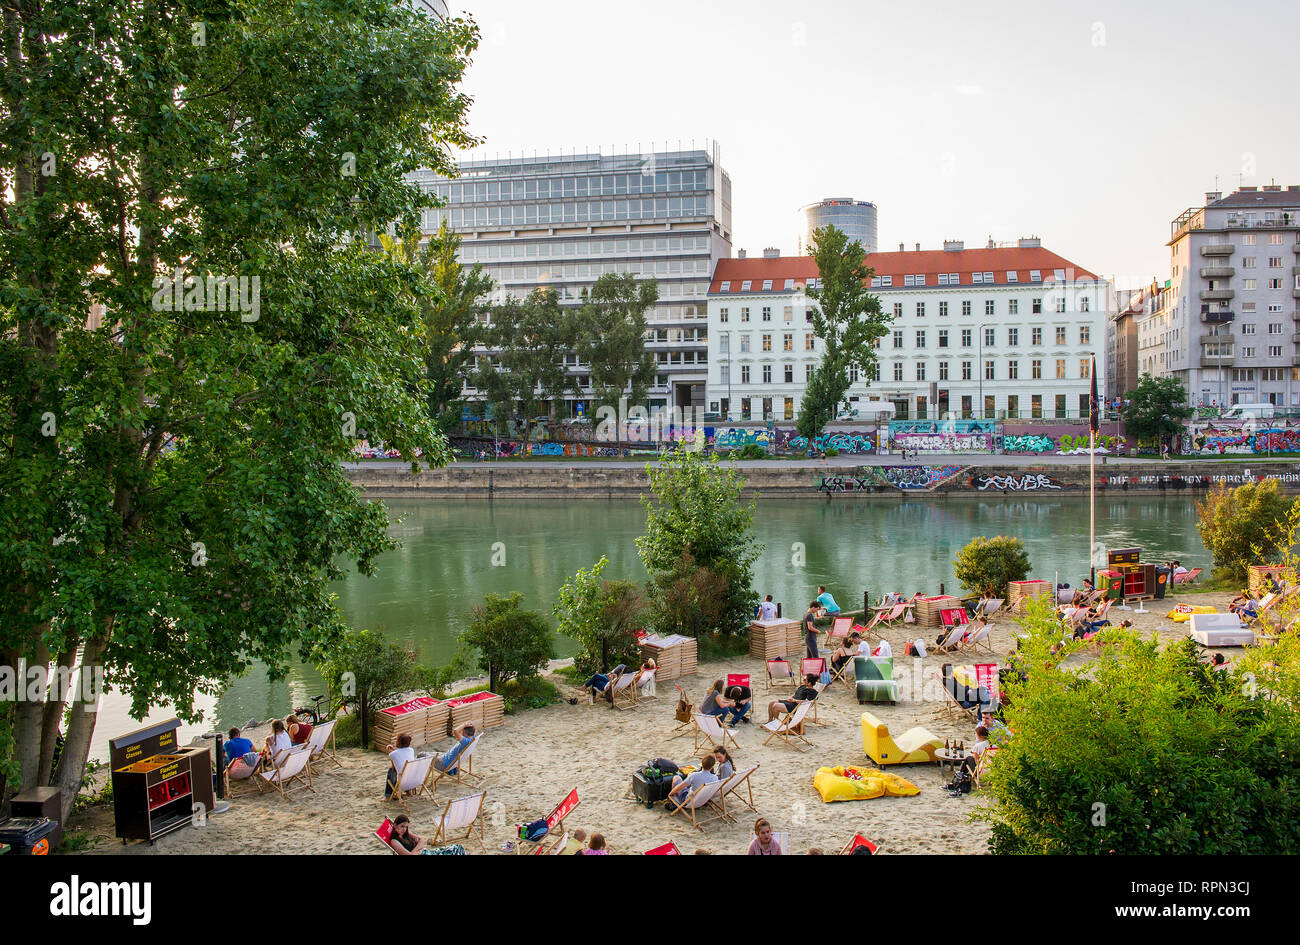 People chilling at Strandbar Herrmann, Vienna's urban beach, open from mid-April to early October, along the Danube canal (Donaukanal) Stock Photo